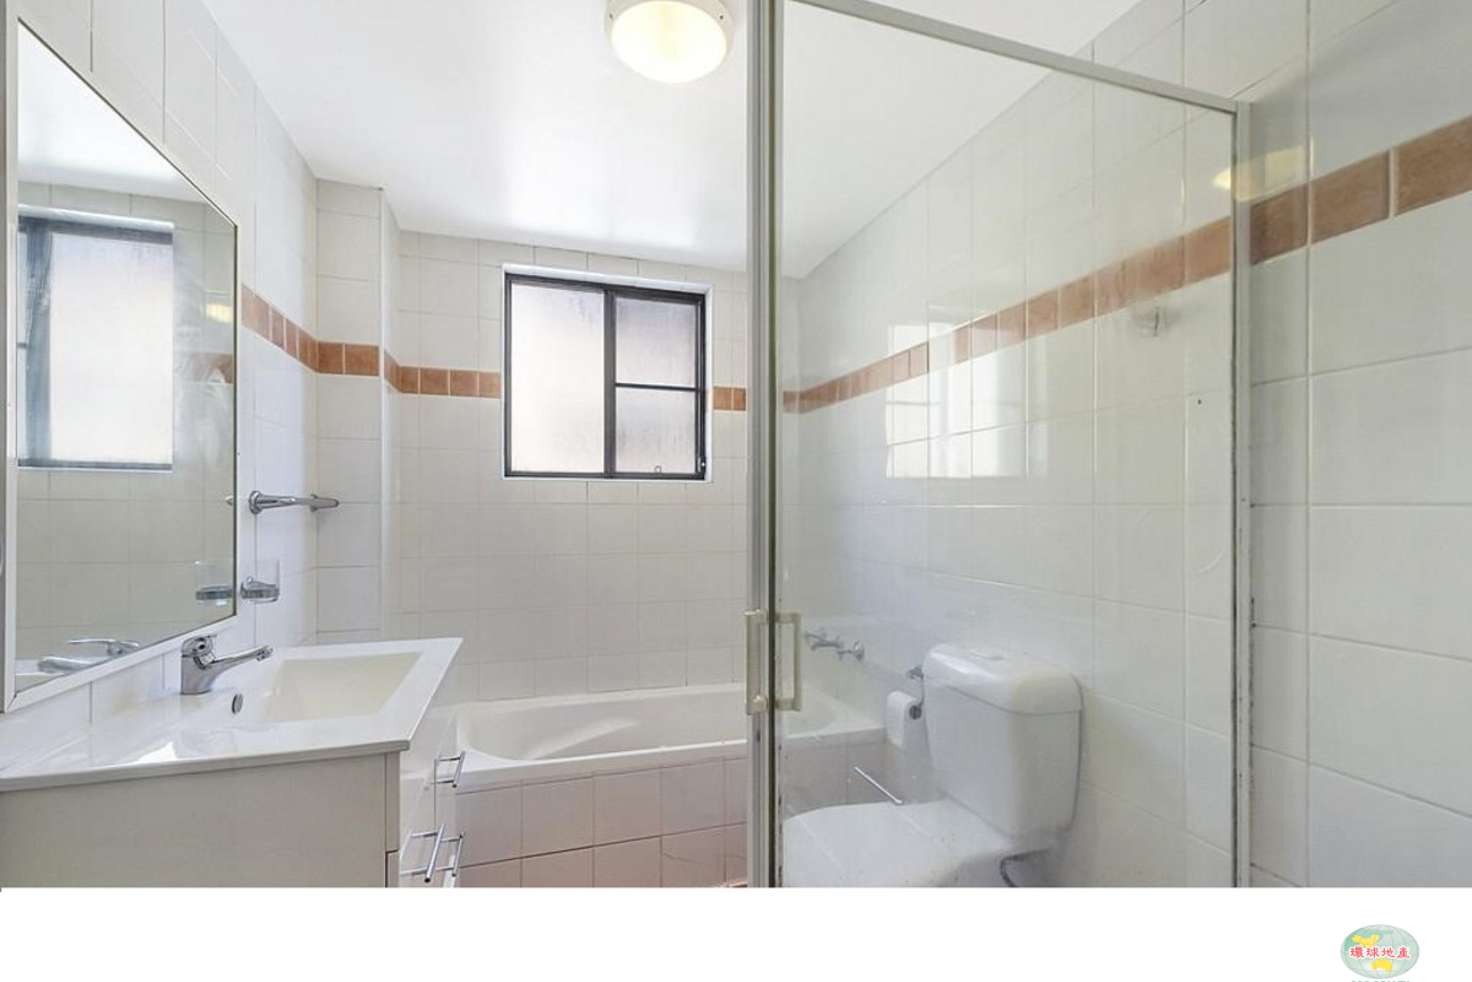 Main view of Homely unit listing, 4/23 Good Street, Parramatta NSW 2150